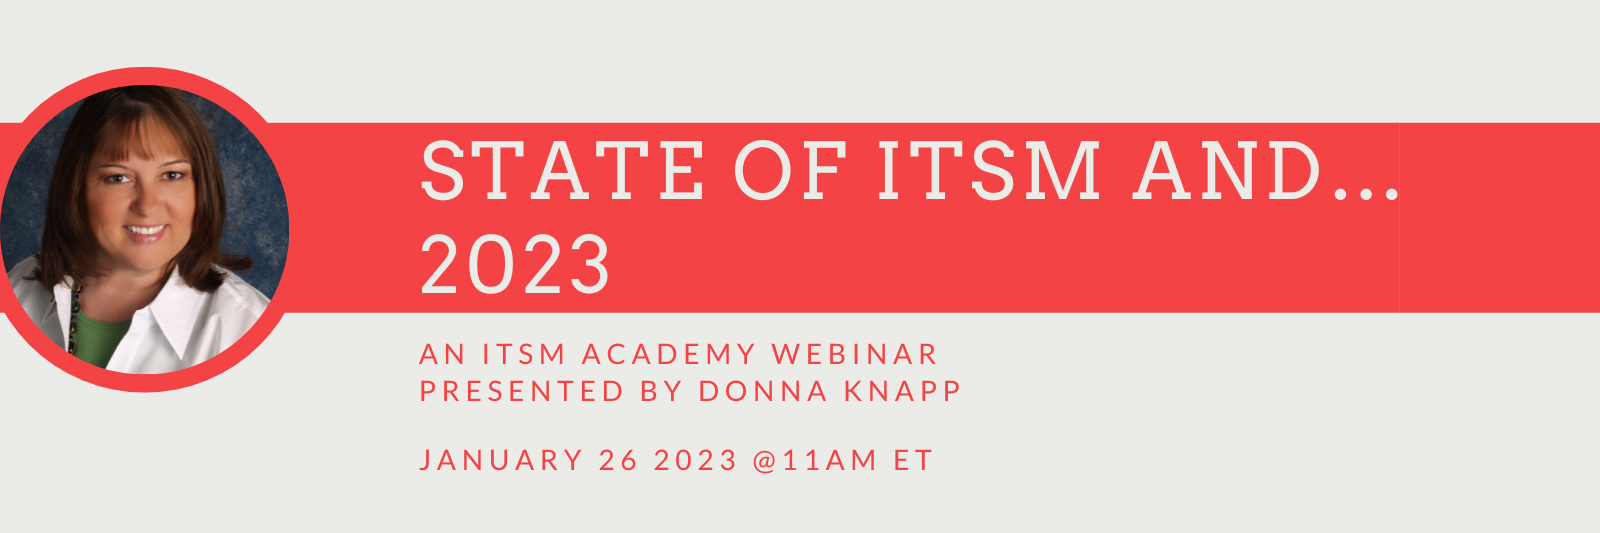 State of ITSM and... 2023